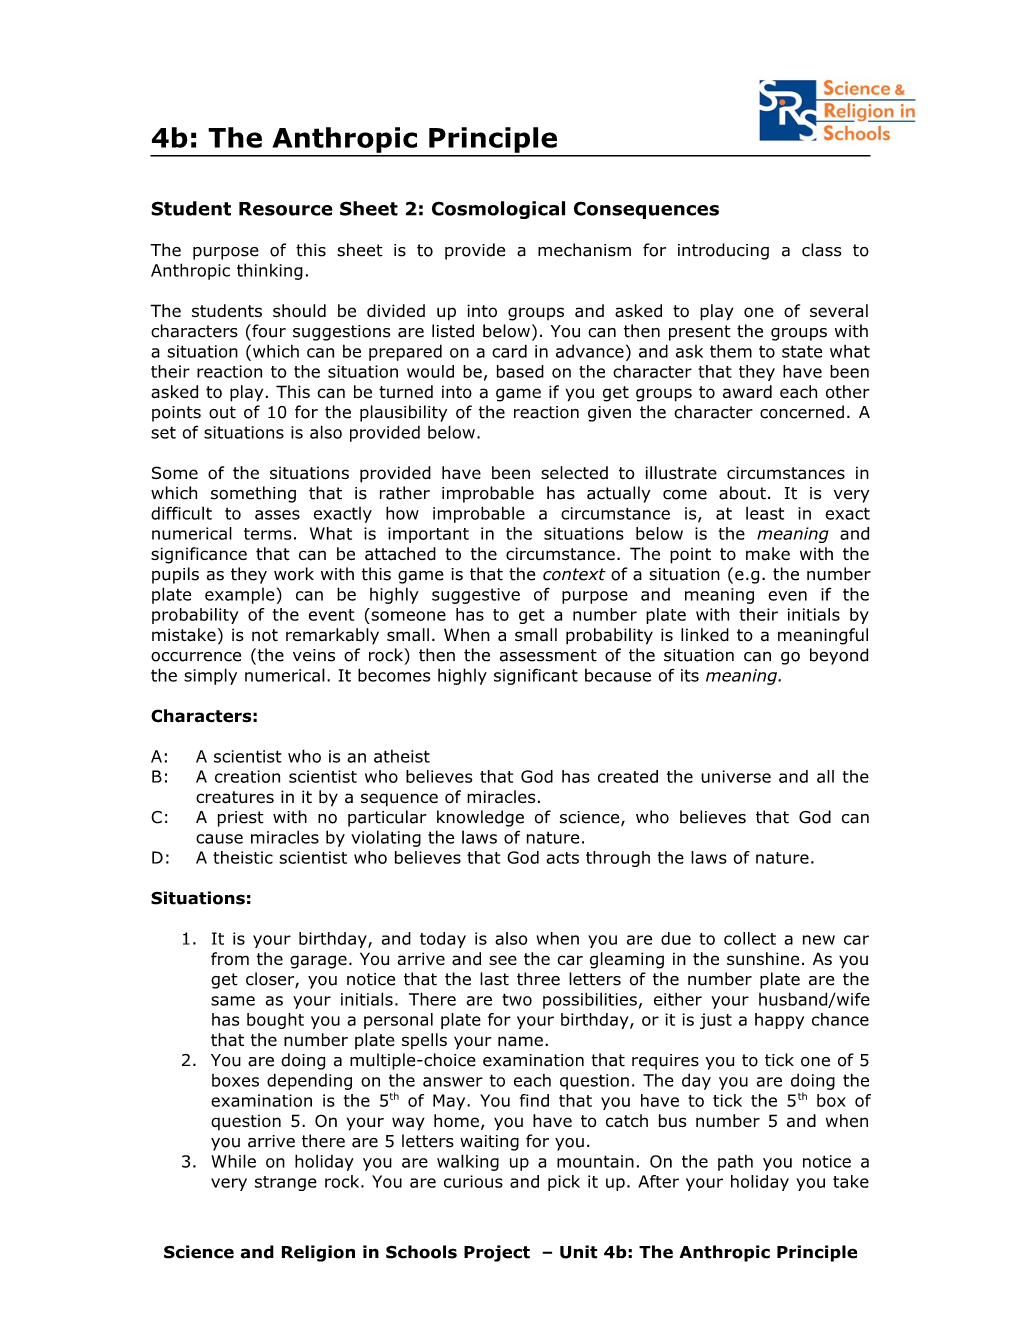 Student Resource Sheet 2: Cosmological Consequences